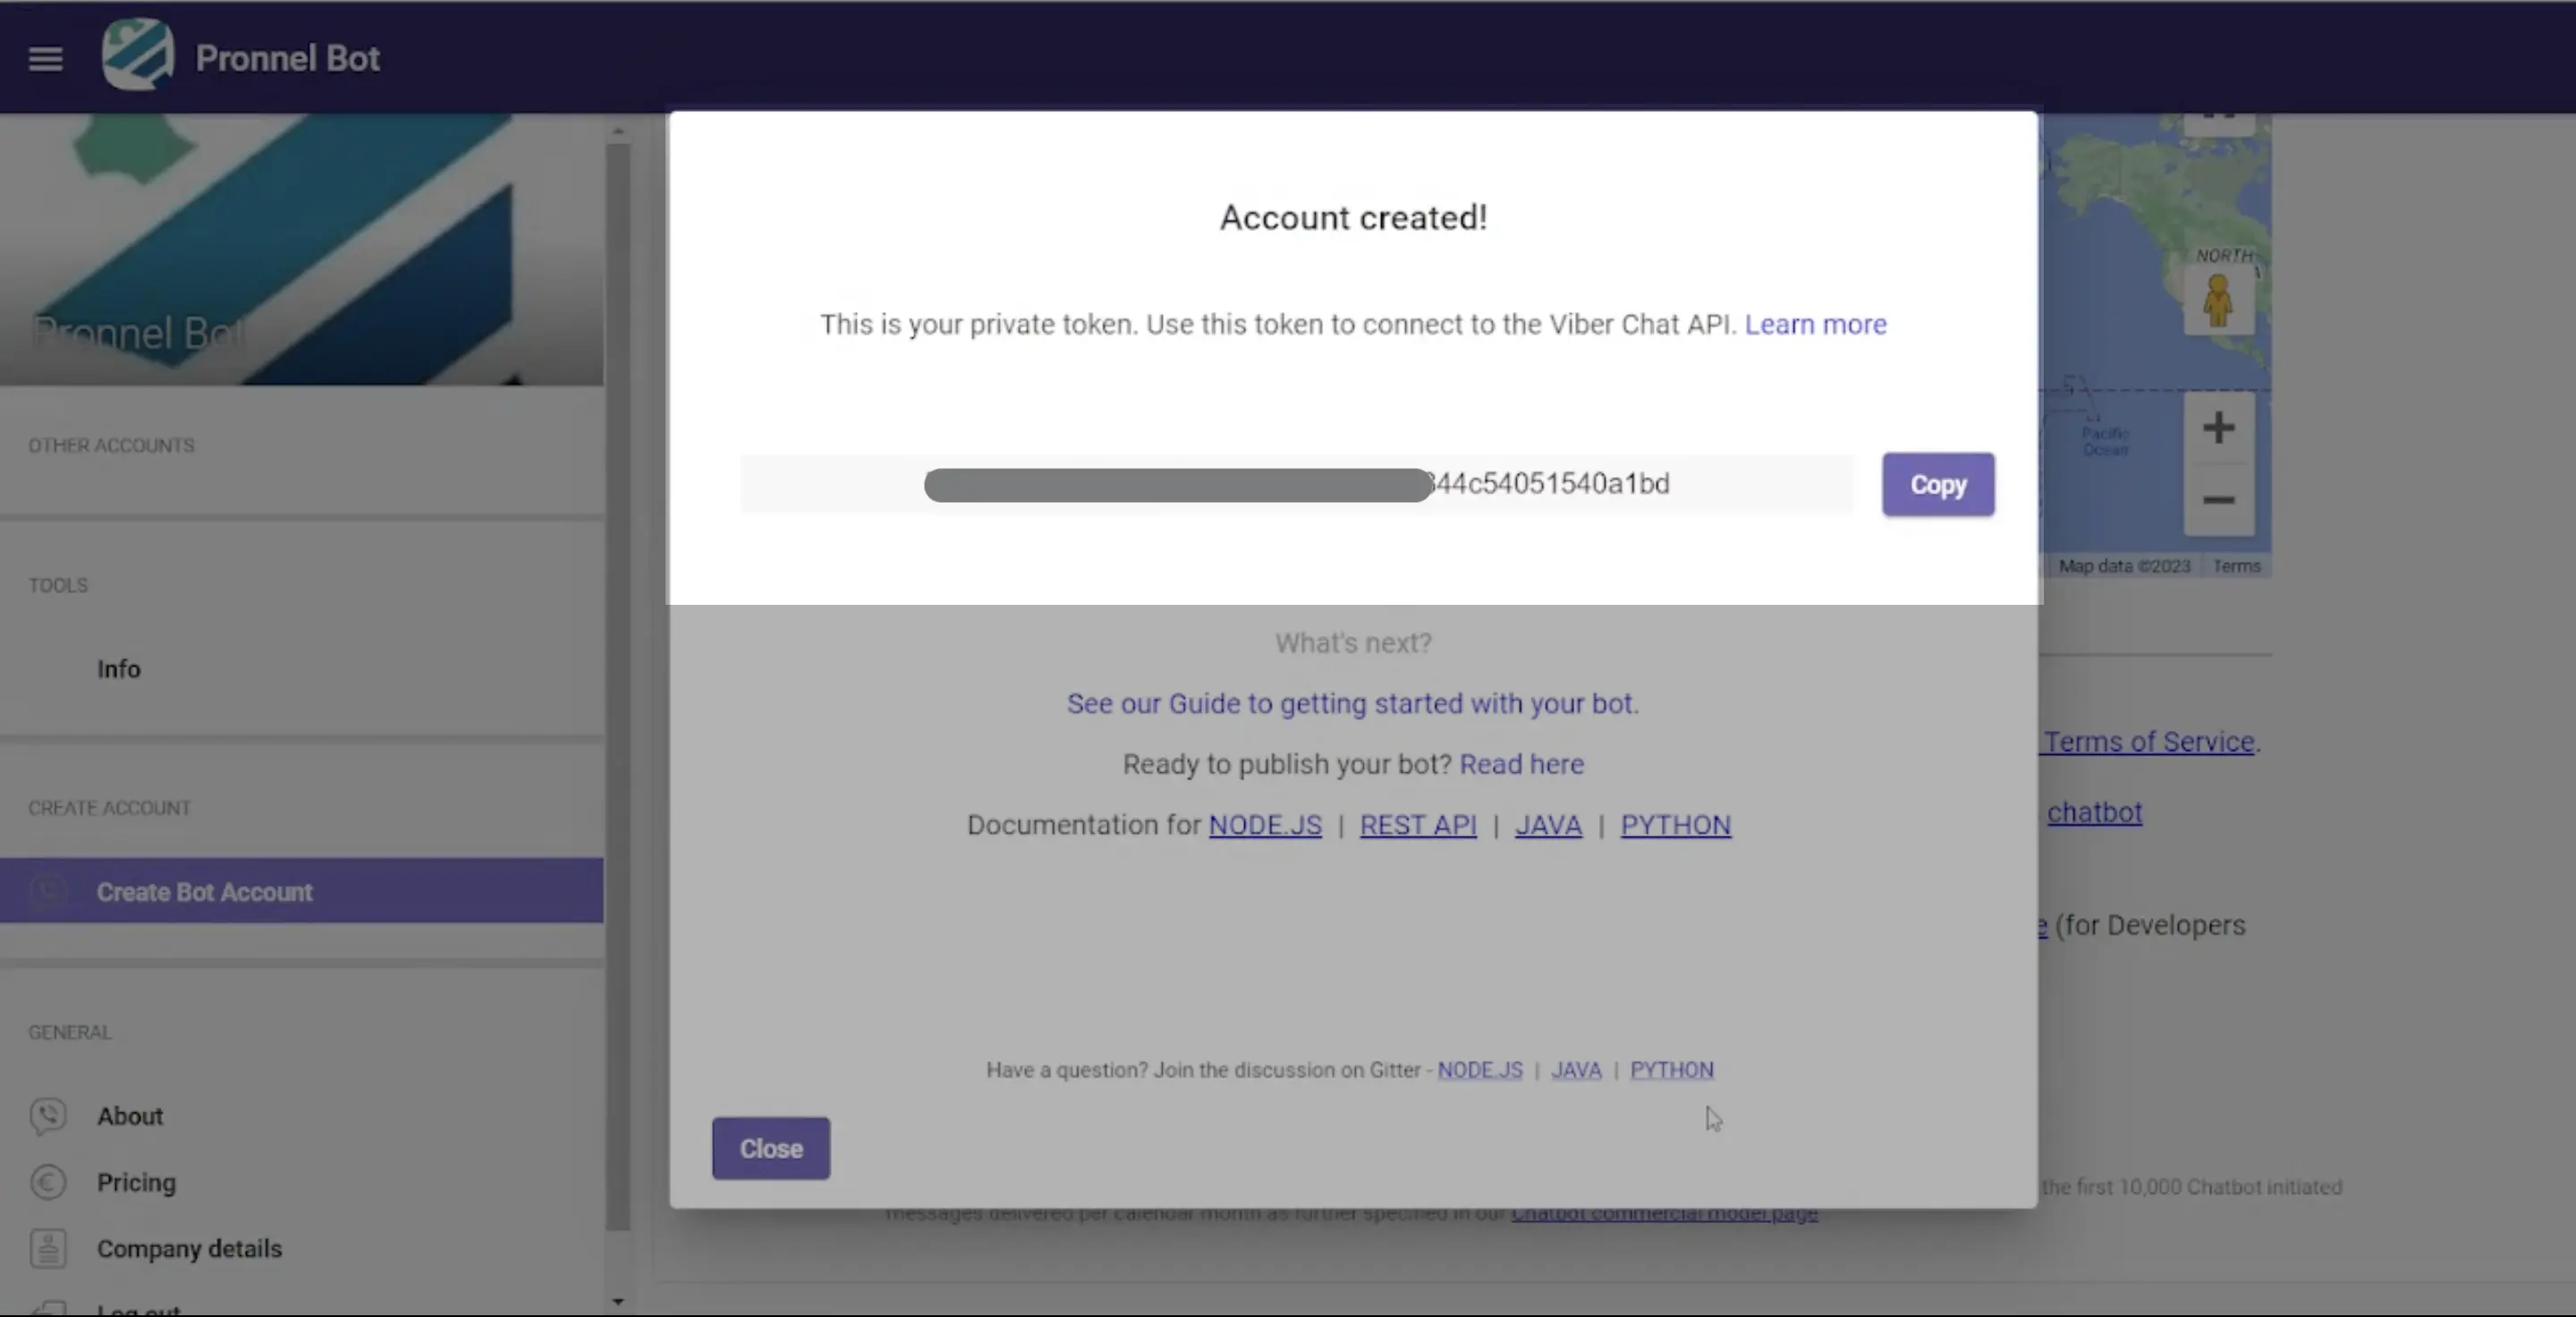 Copy your private token and use this to connect Pronnel to the Viber Chat API